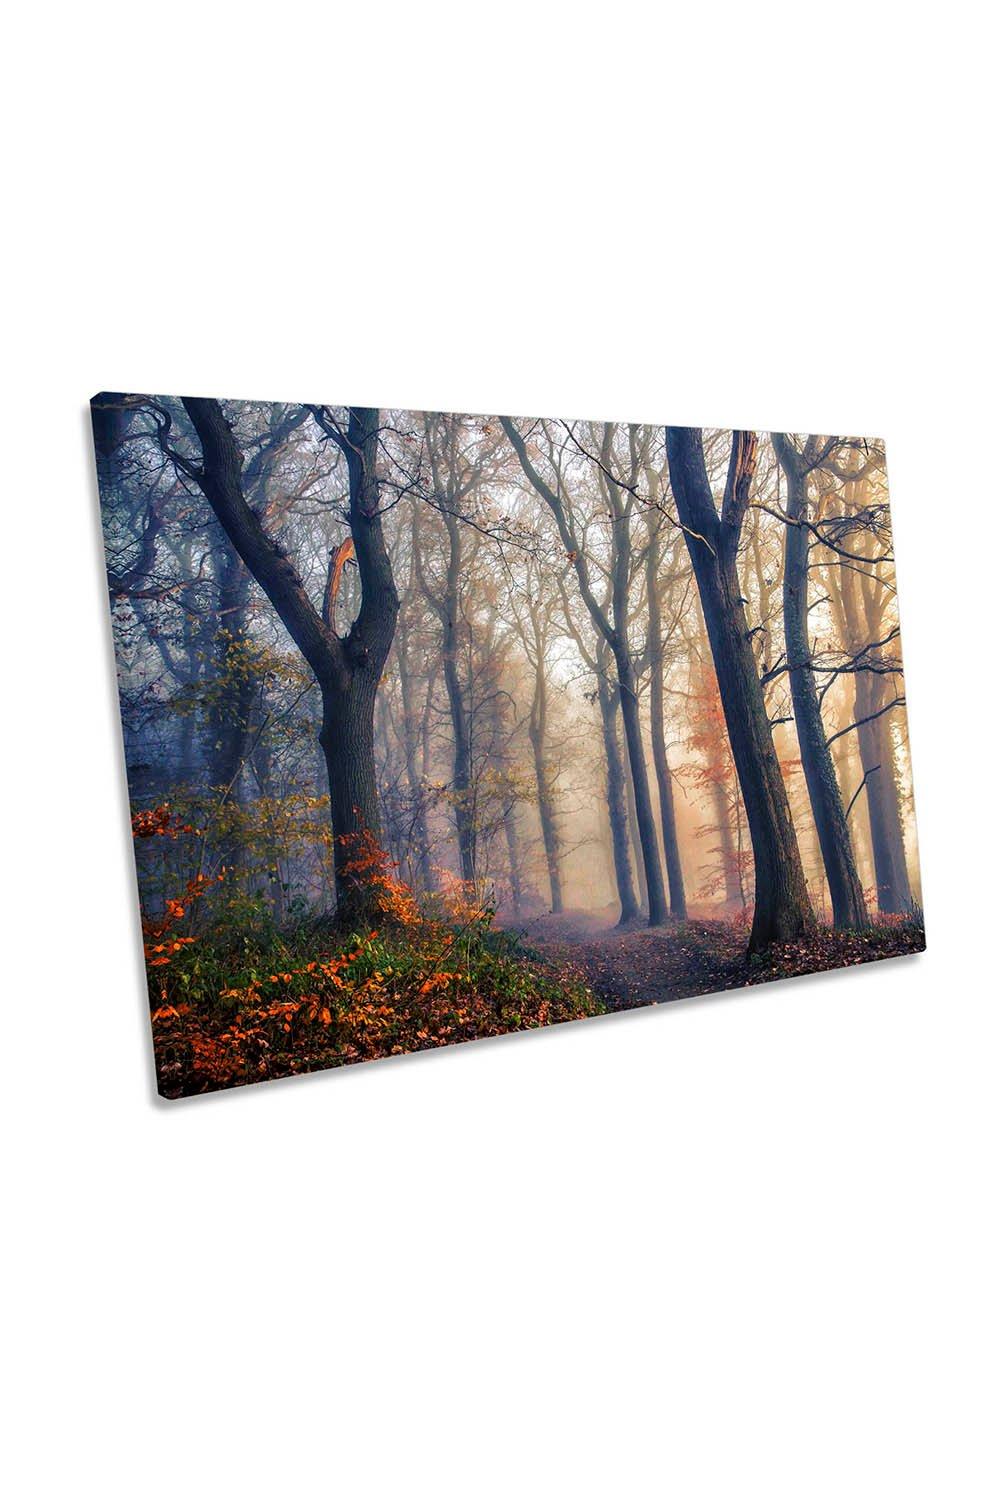 The Forest Paths Woodland Misty Canvas Wall Art Picture Print